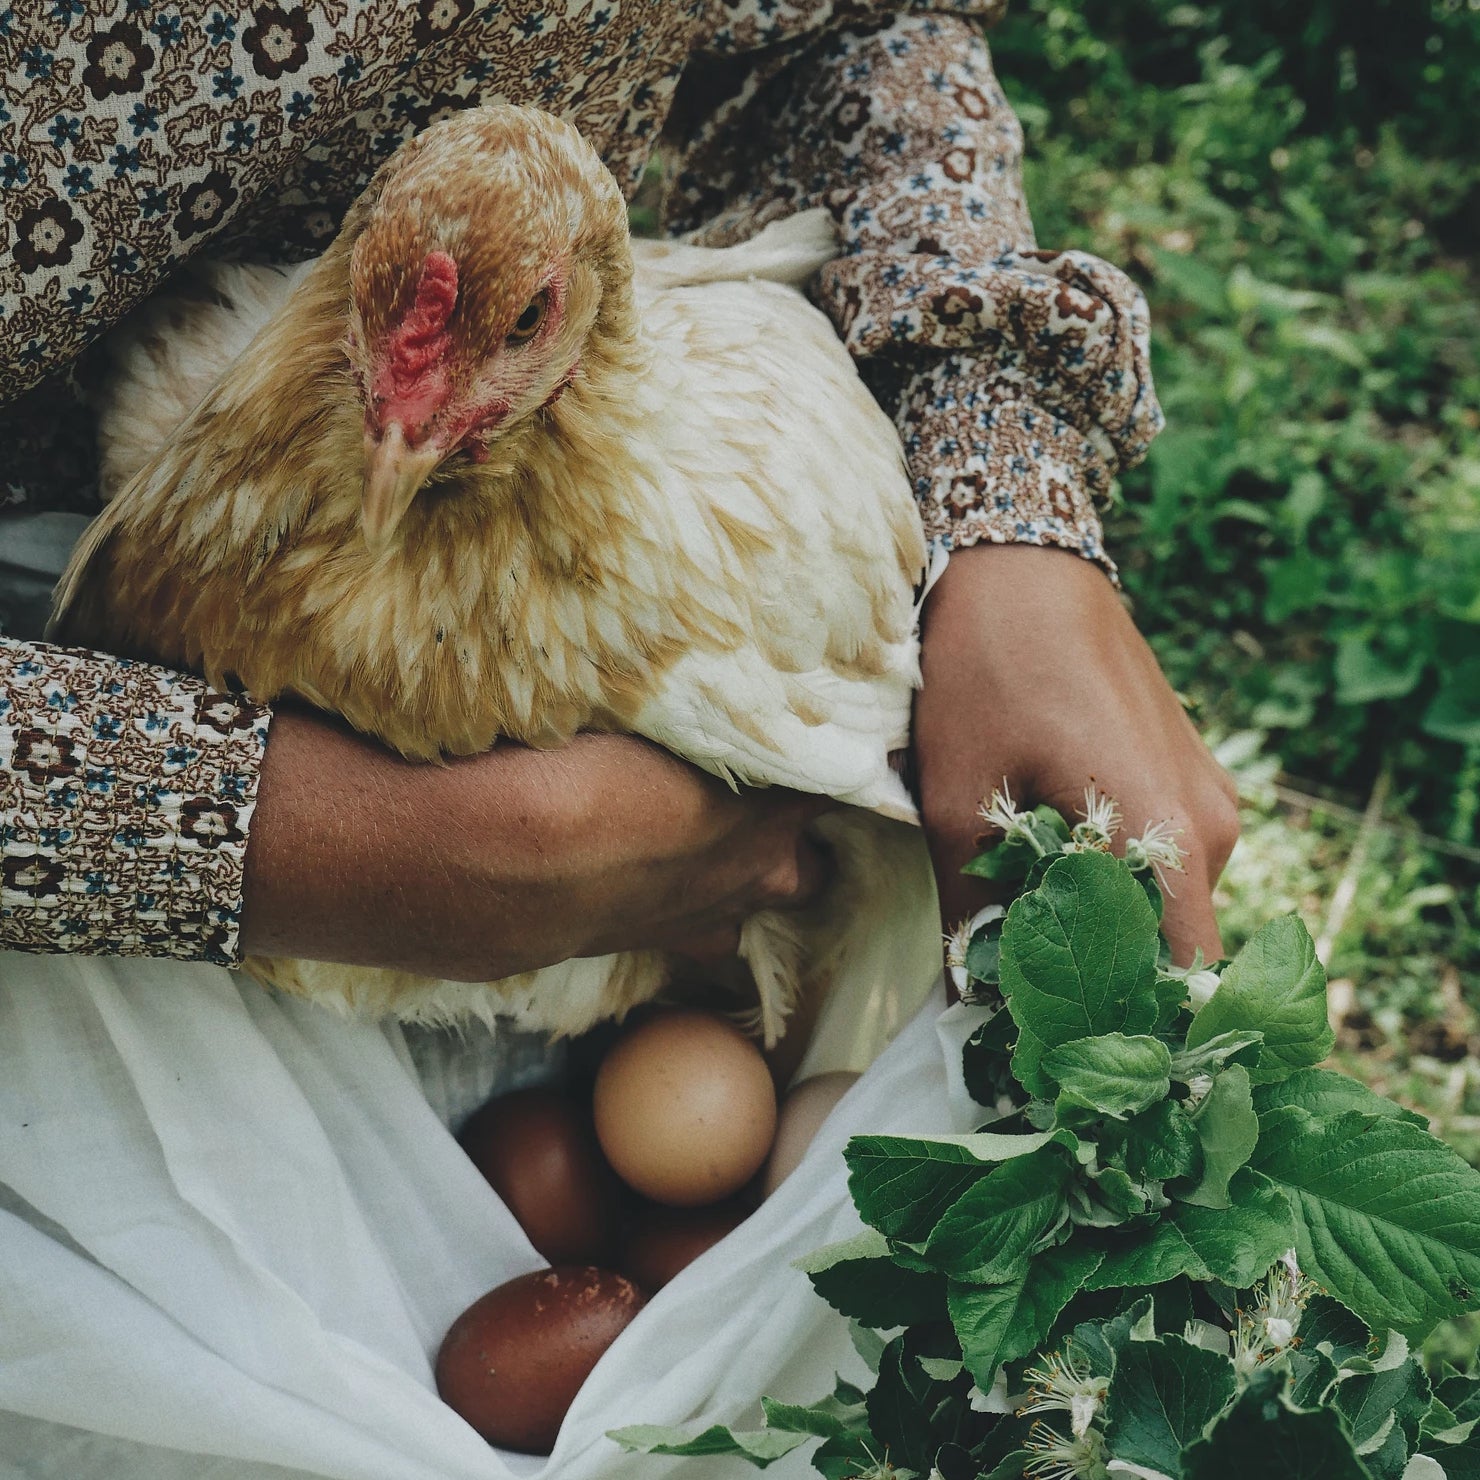 Person holds and chicken in one hand and cradles eggs in an apron in the other